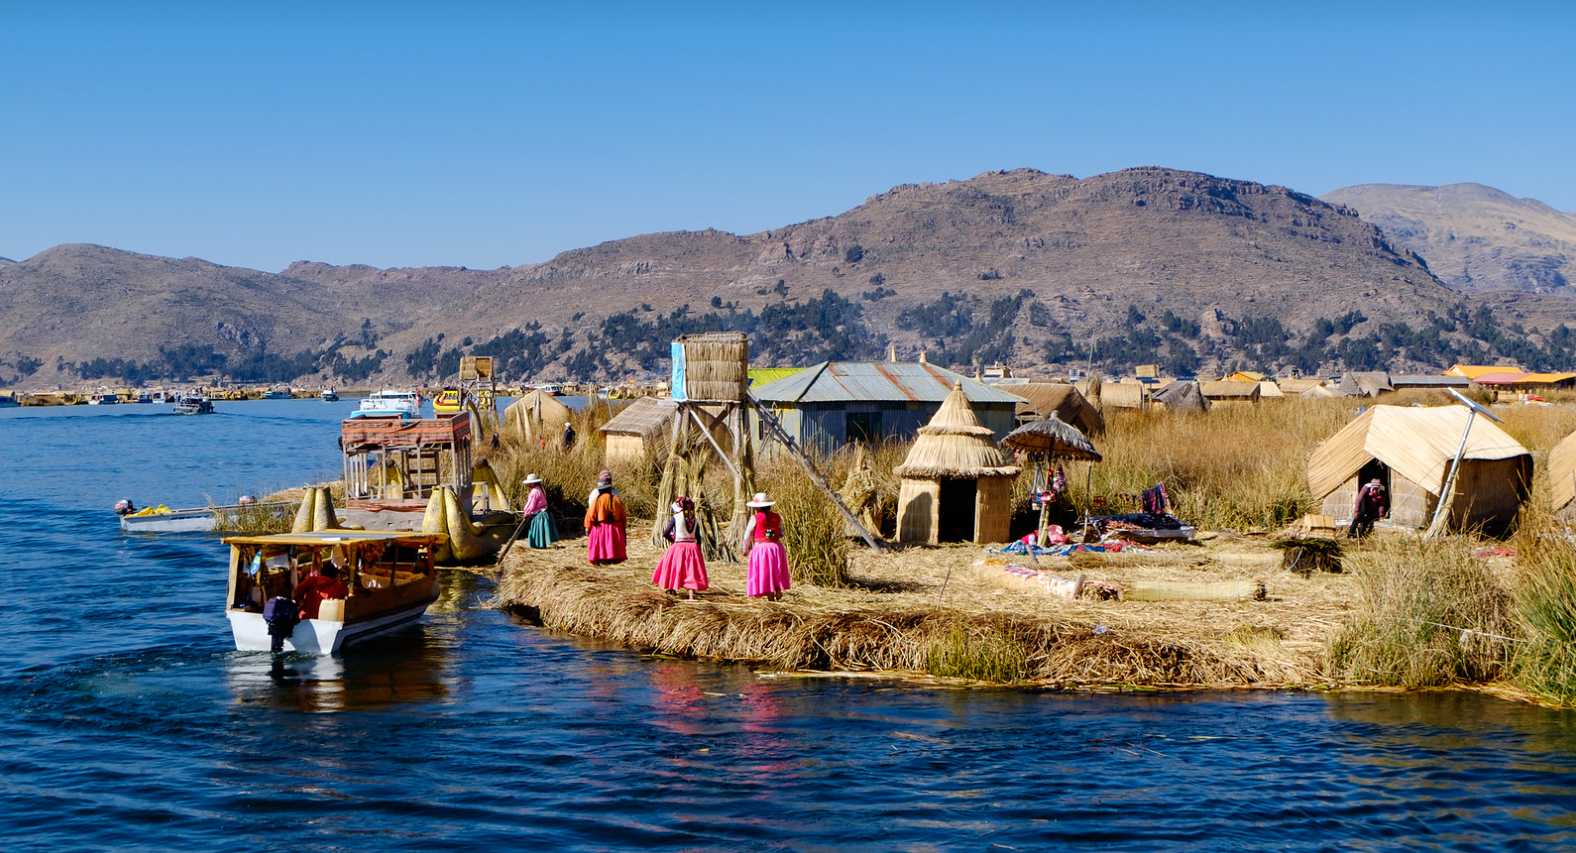 Daily Life on the Island of Uros